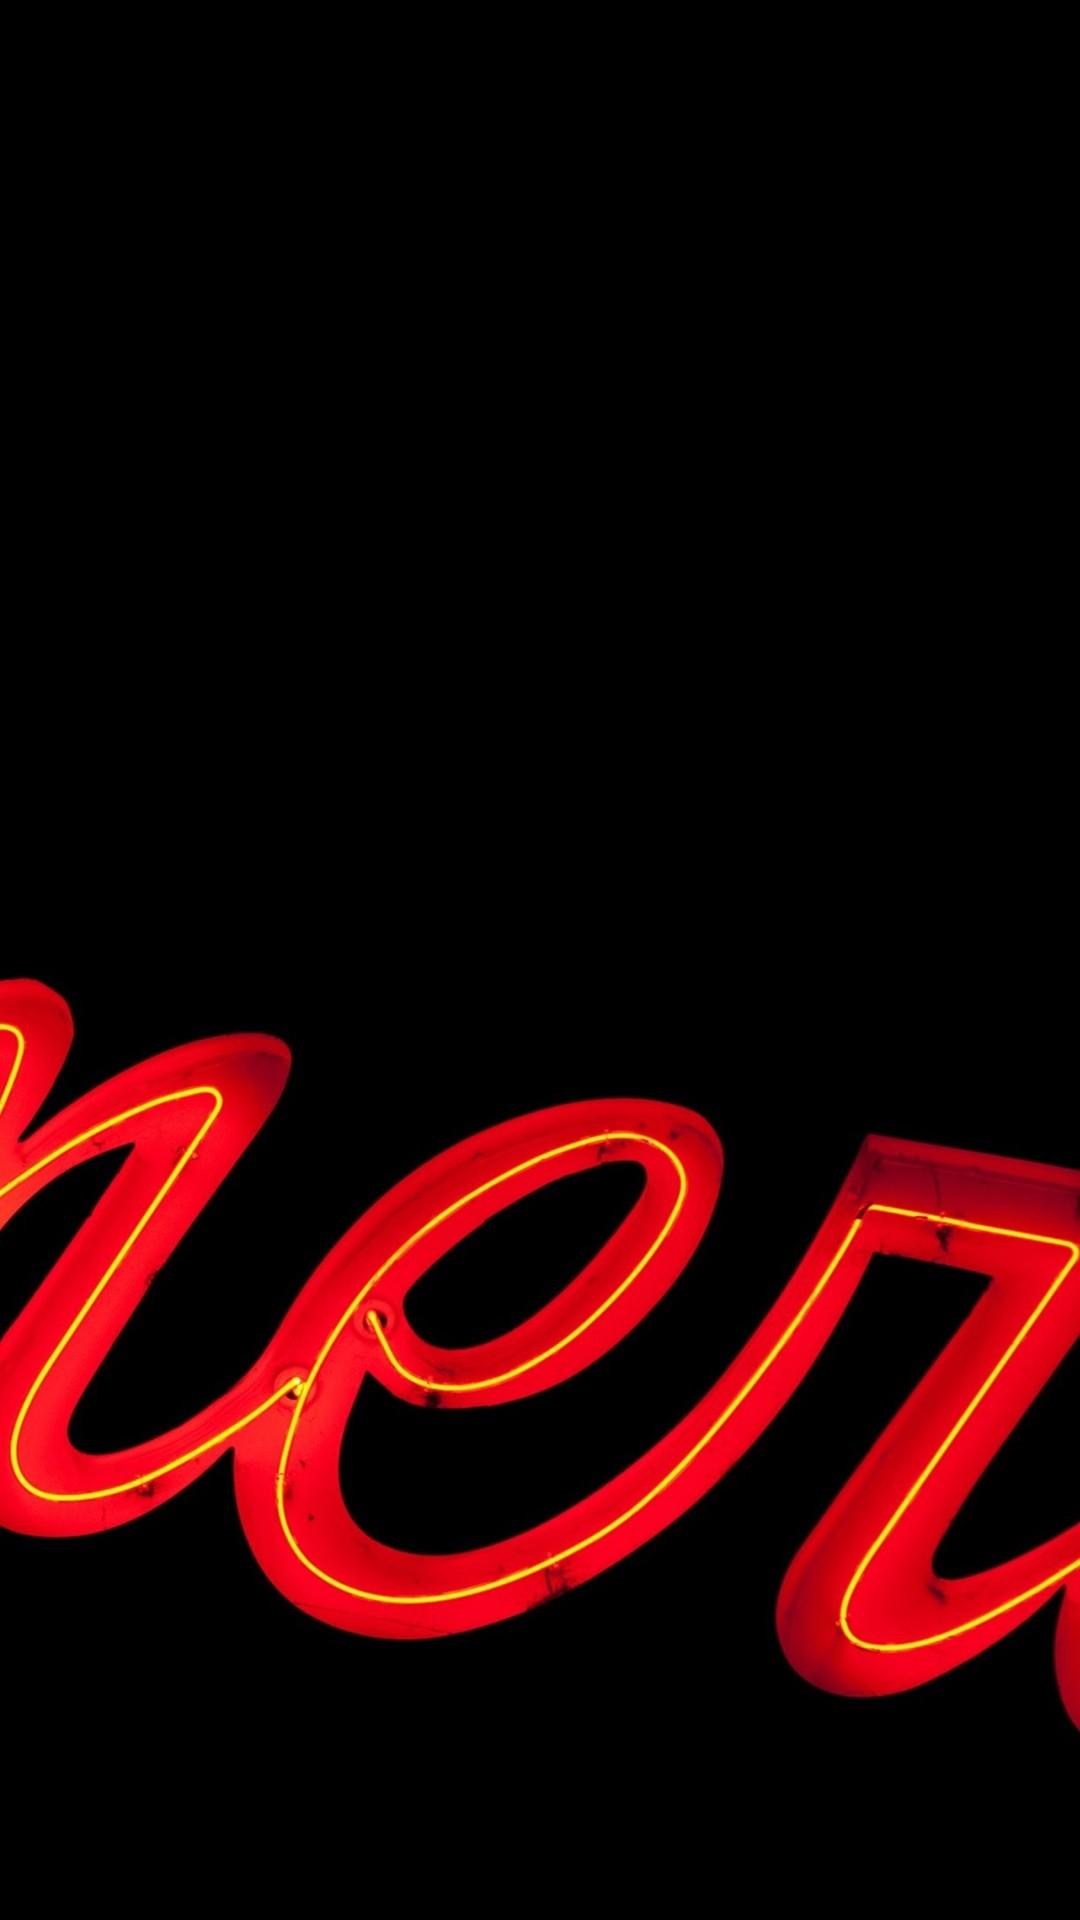 Neon sign wallpaper for iPhone and Android - Neon red